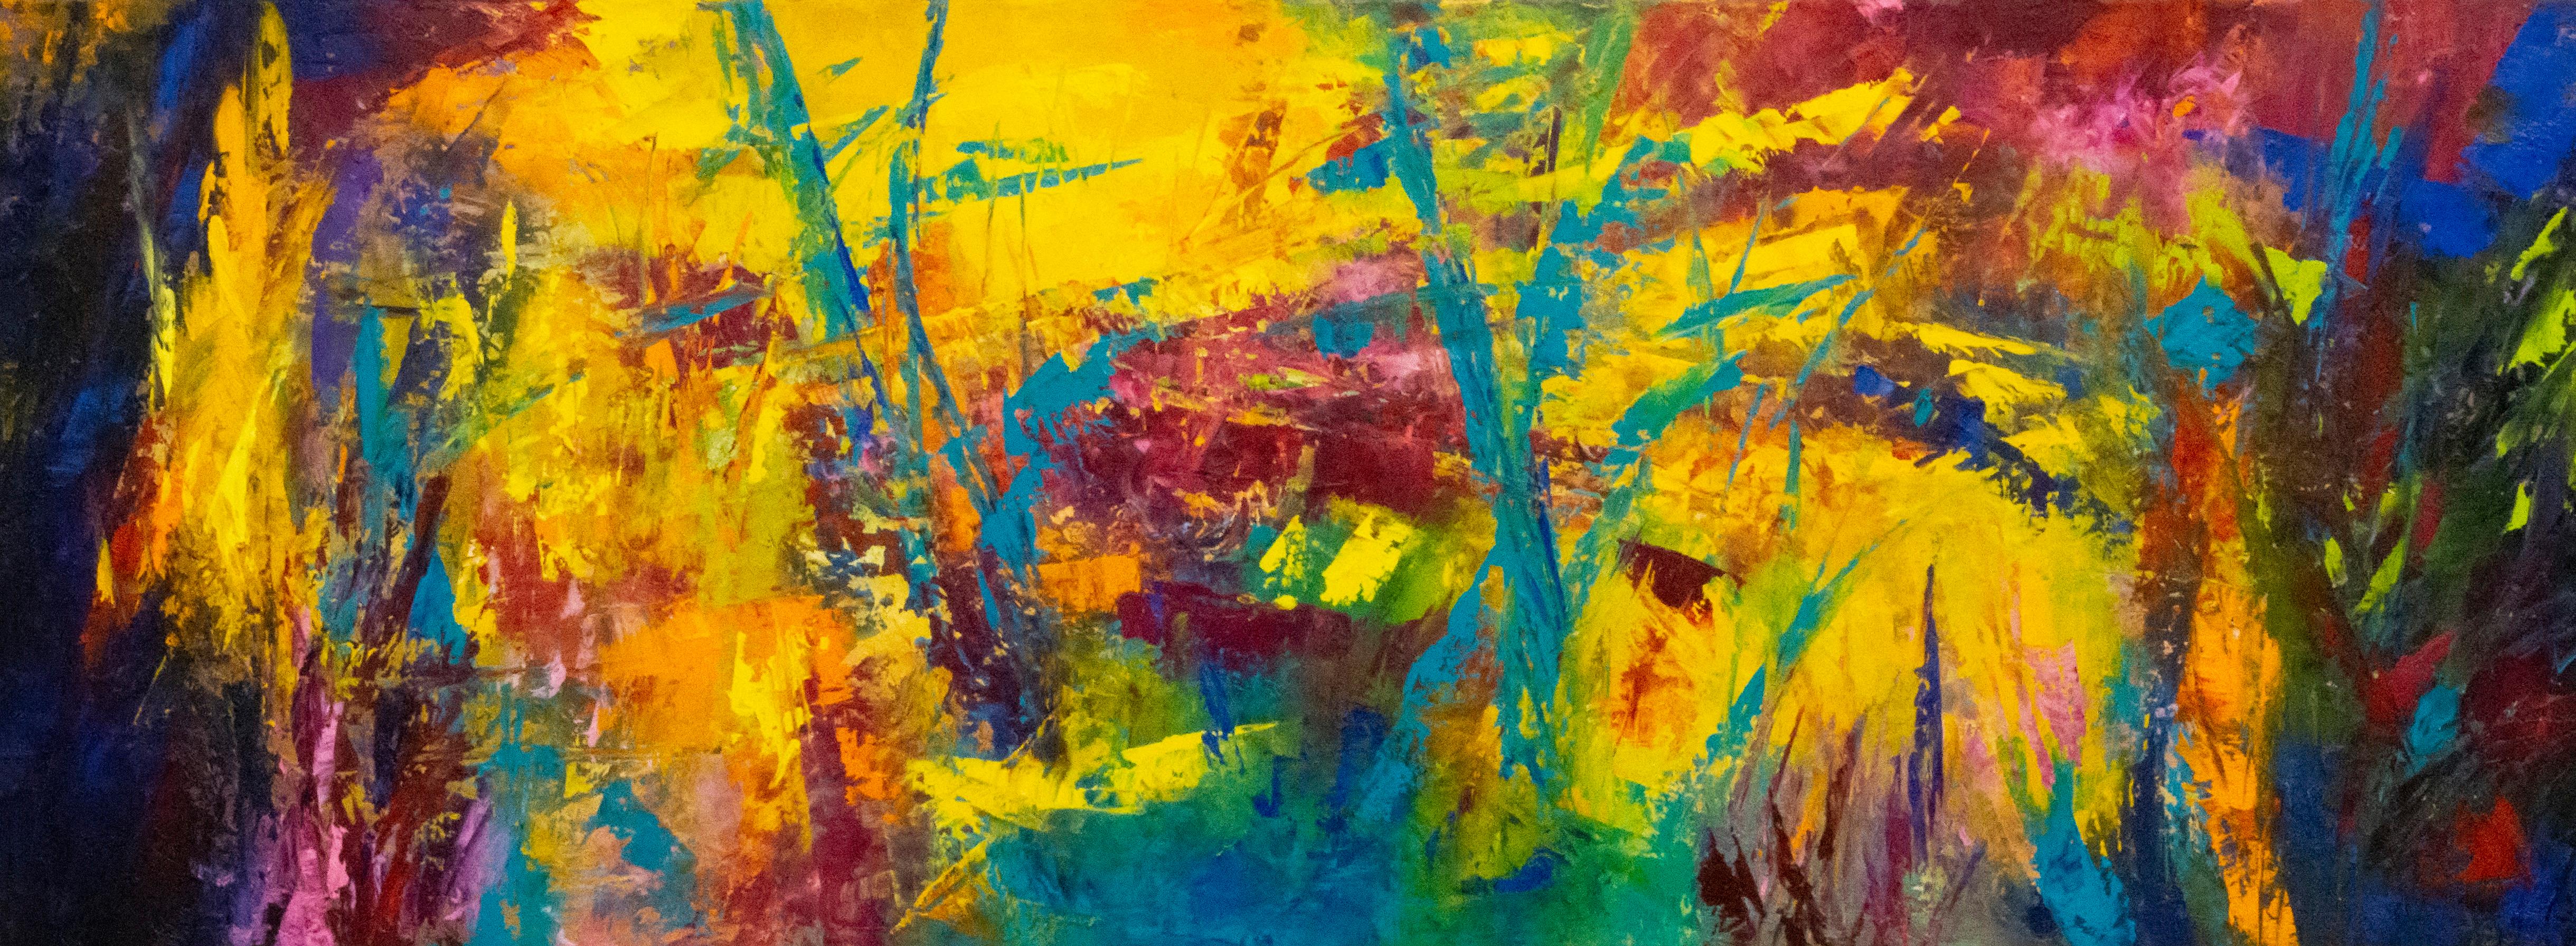 Aleta Pippin Abstract Painting - Caribbean Rhapsody - colors of the Caribbean create energy and movement